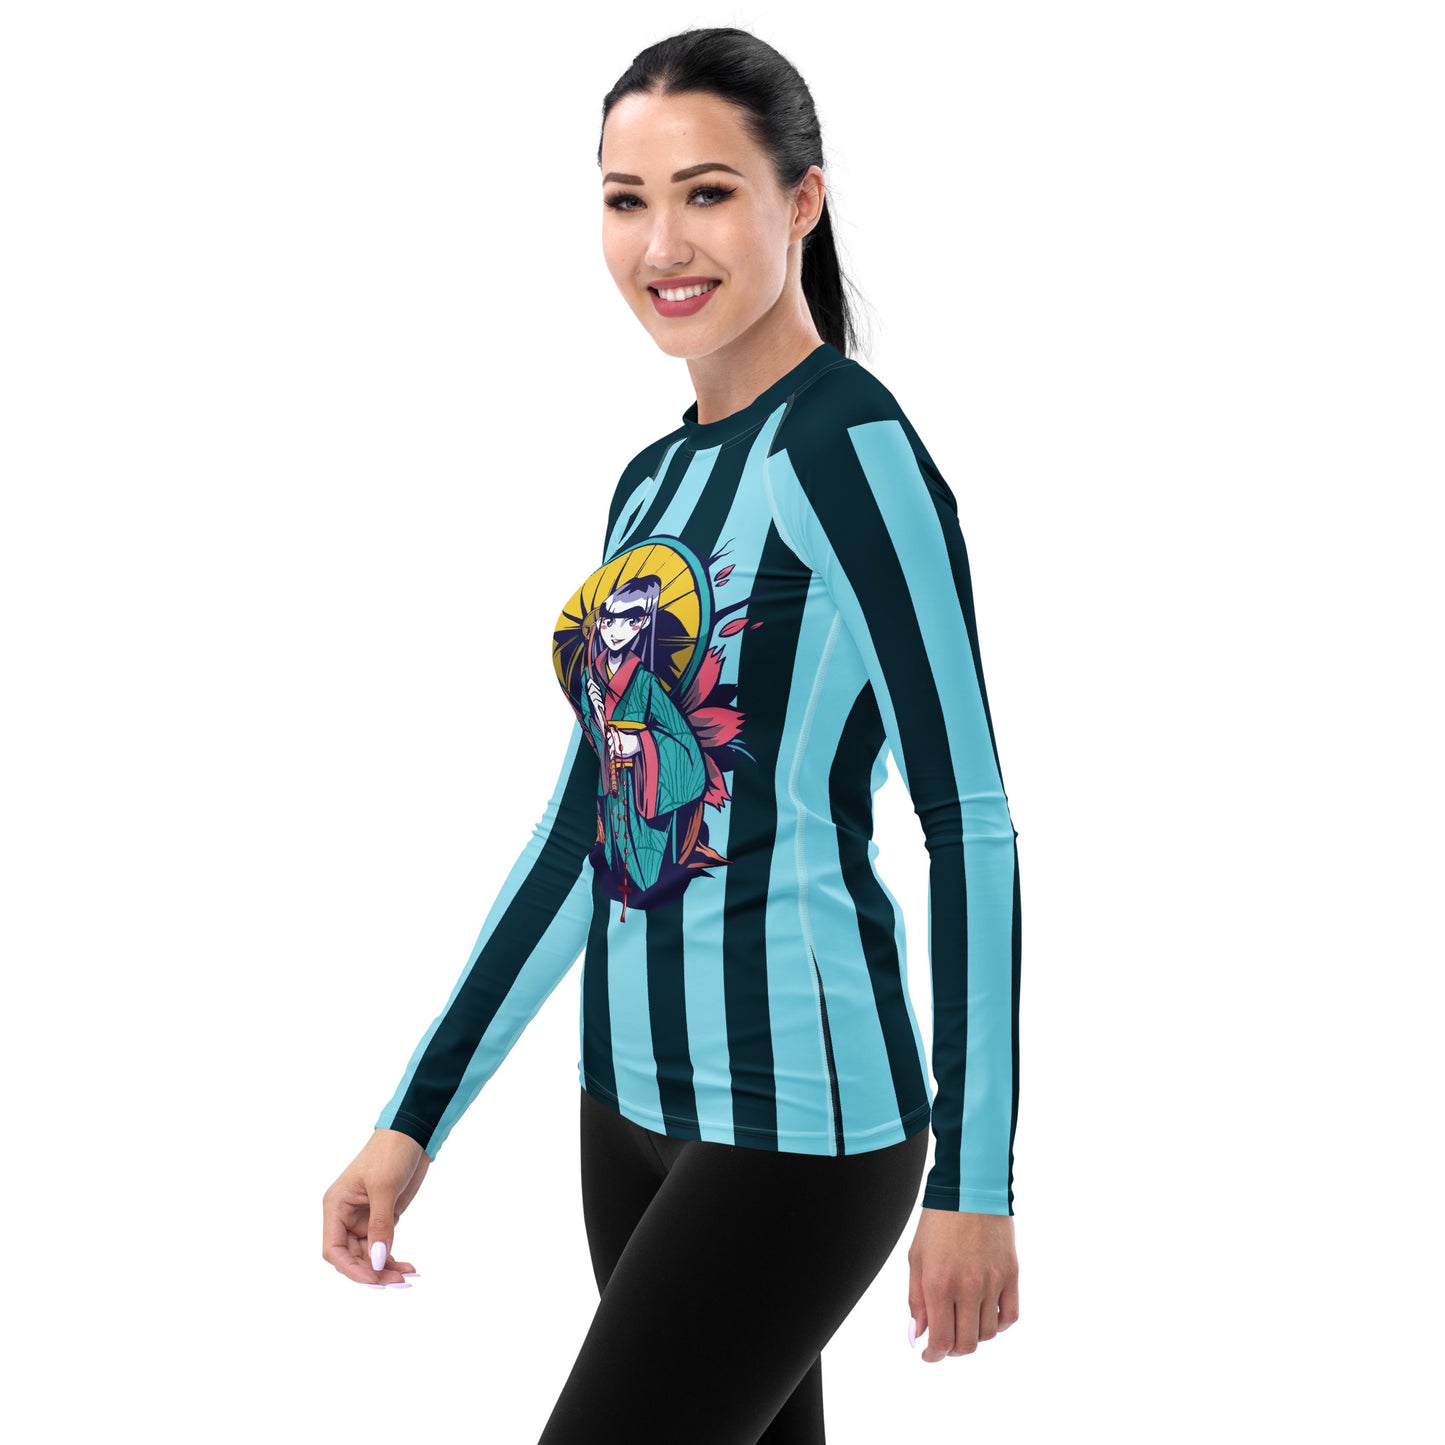 GOODNESS OF THE LORD- Women's Rash Guard